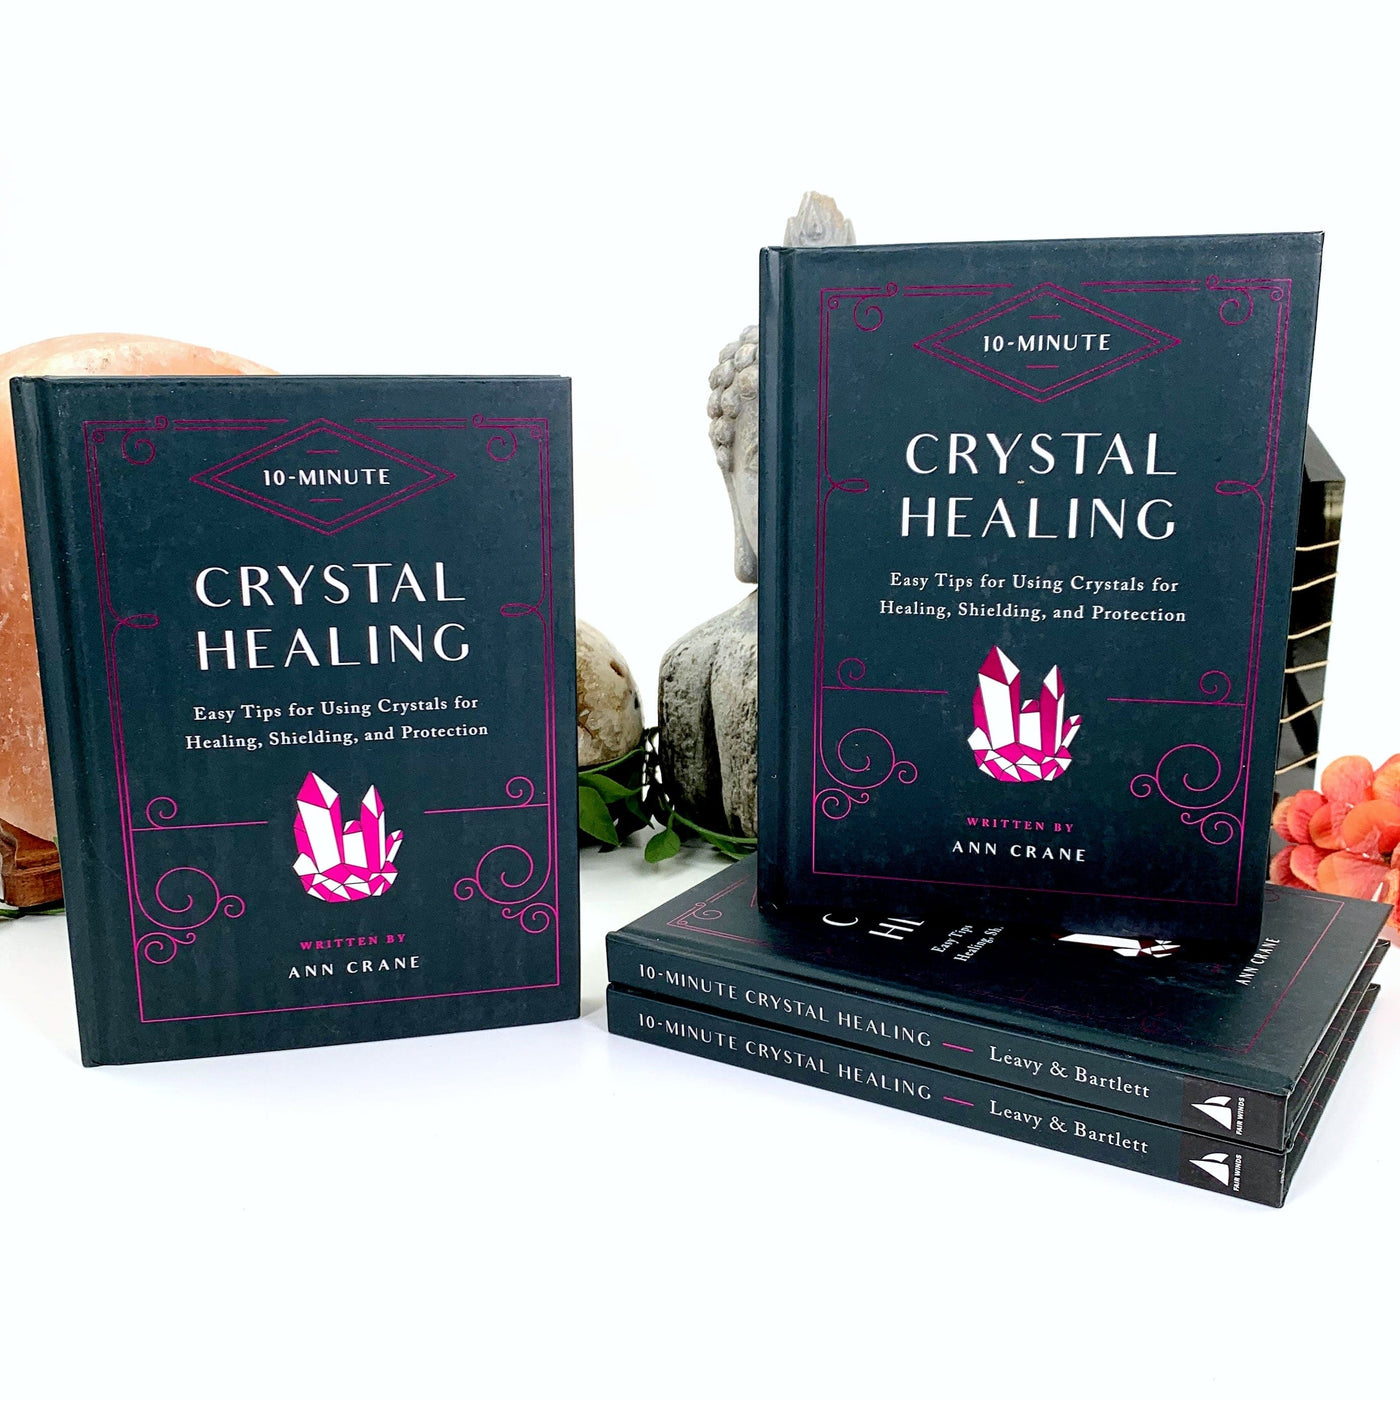 Four 10-Minute Crystal Healing by Ann Crane Books displayed, 2 standing.